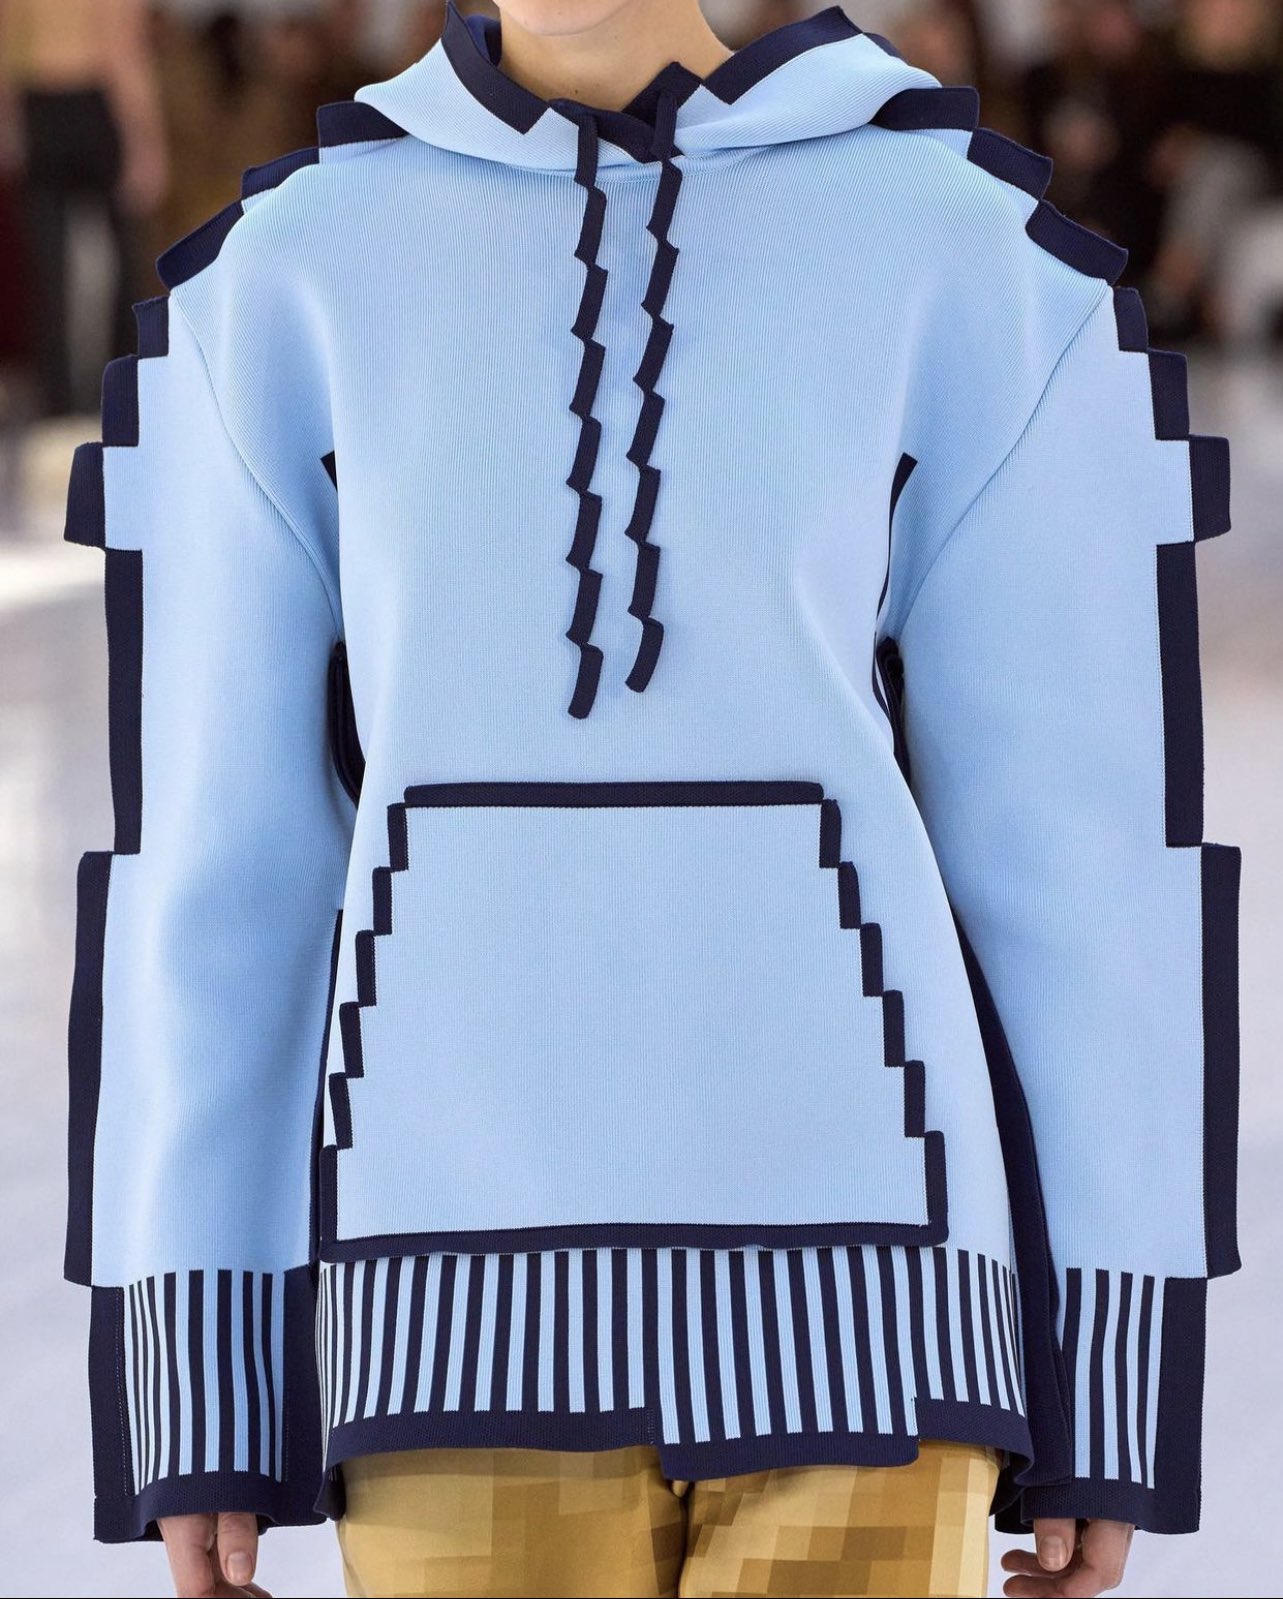 Loewe unveils new pixelated clothing collection featuring £1,750 hoodie and  £2,500 handbag